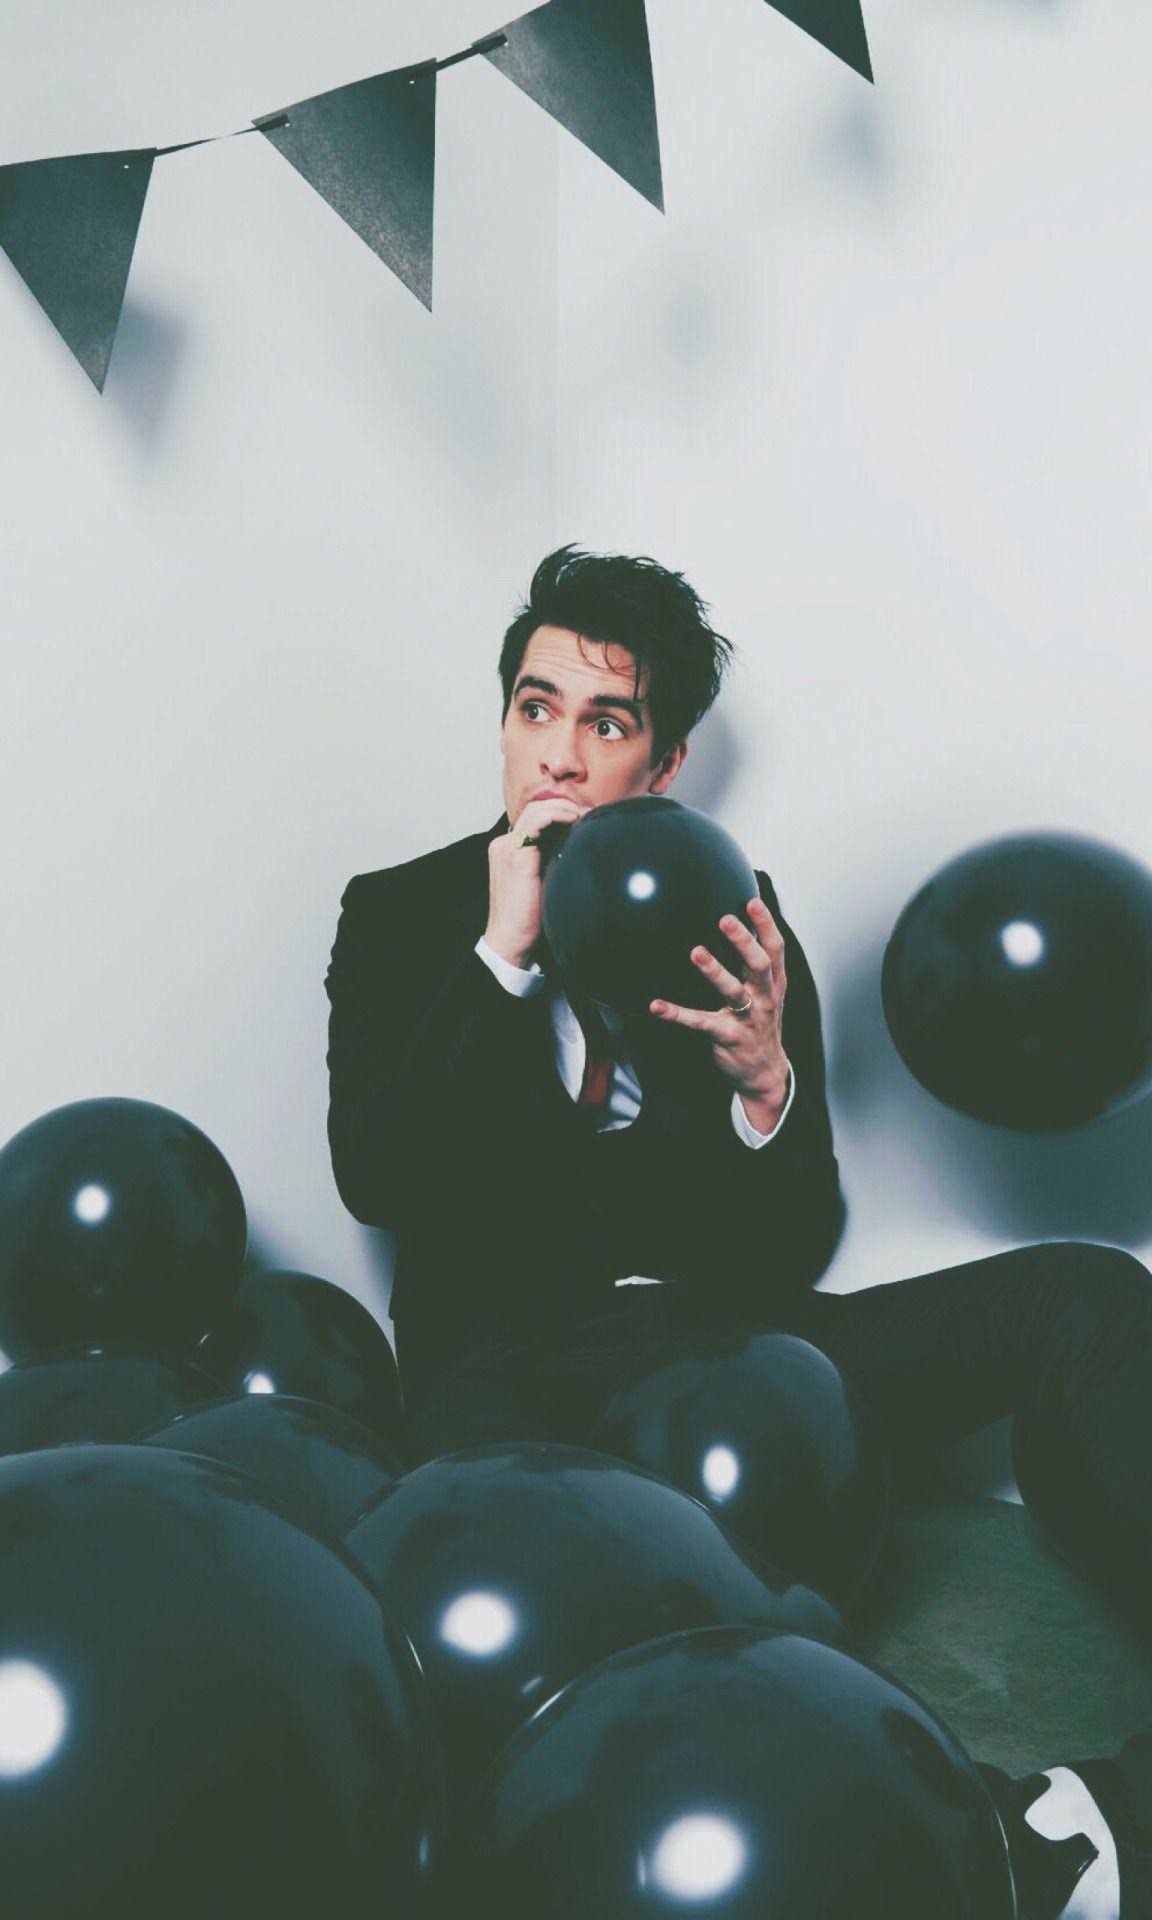 1152x1920 panic! at the disco brendon urie these are perfect size for iphone .